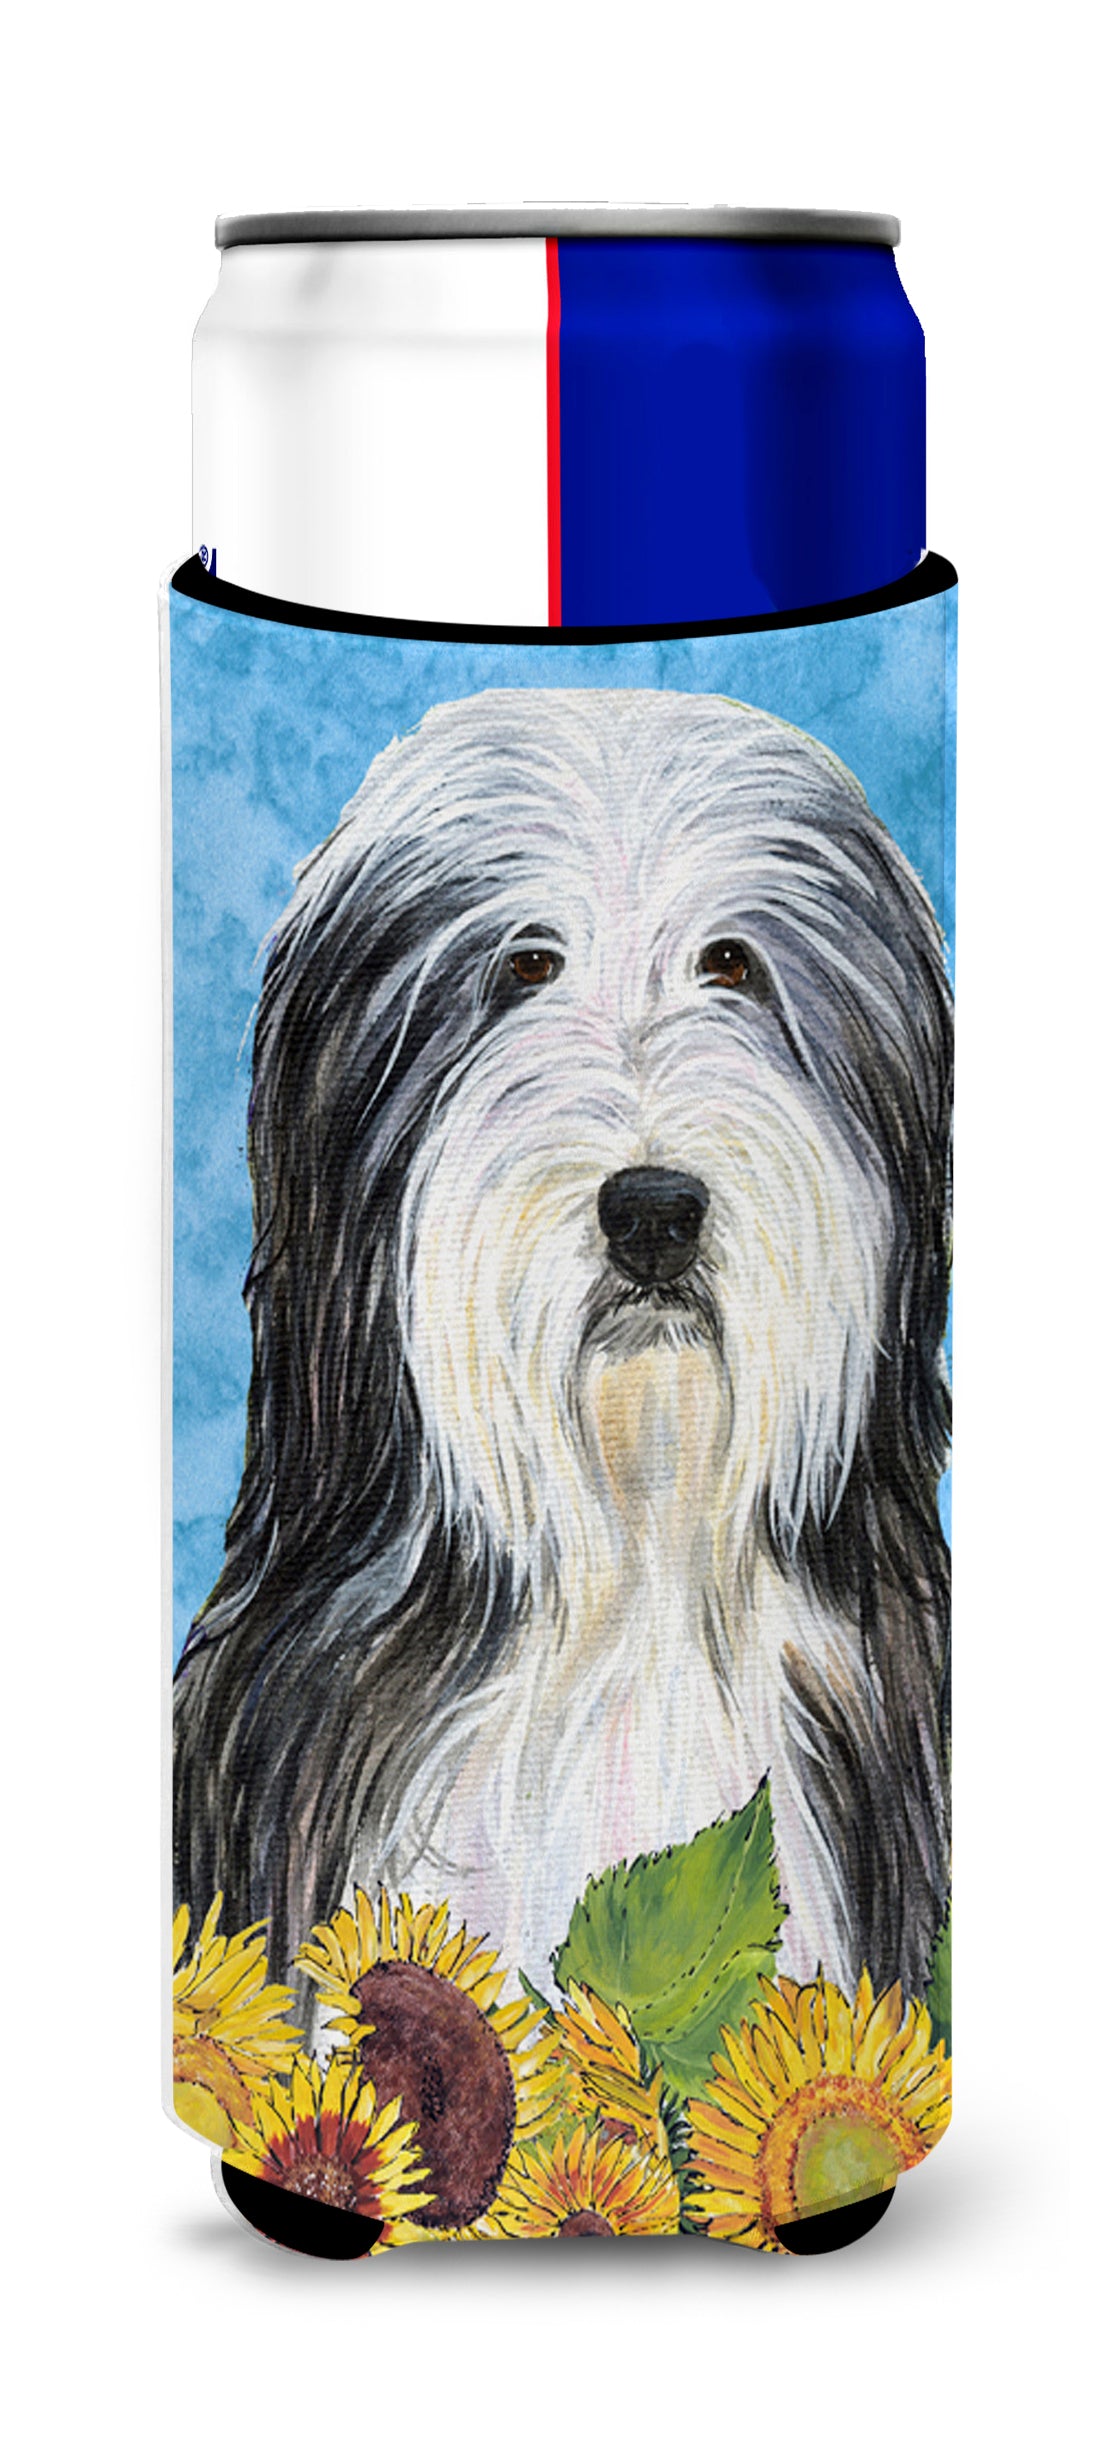 Bearded Collie in Summer Flowers Ultra Beverage Insulators for slim cans SS4130MUK.